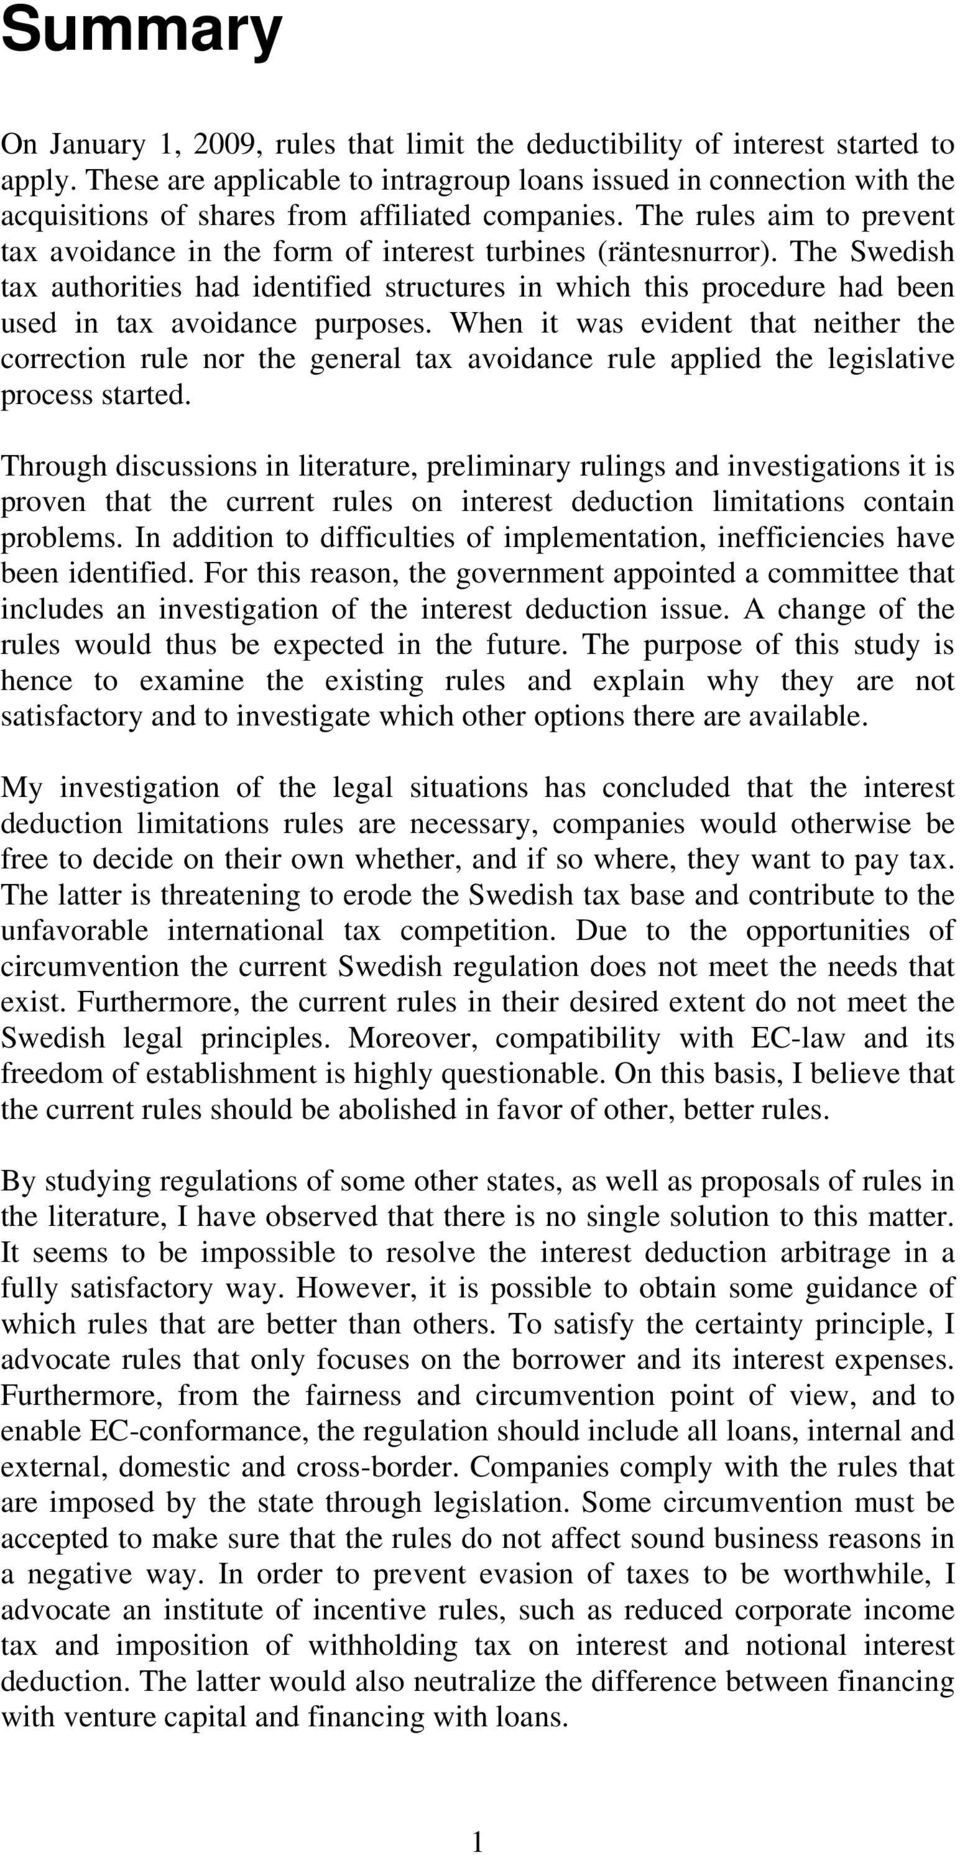 The rules aim to prevent tax avoidance in the form of interest turbines (räntesnurror).